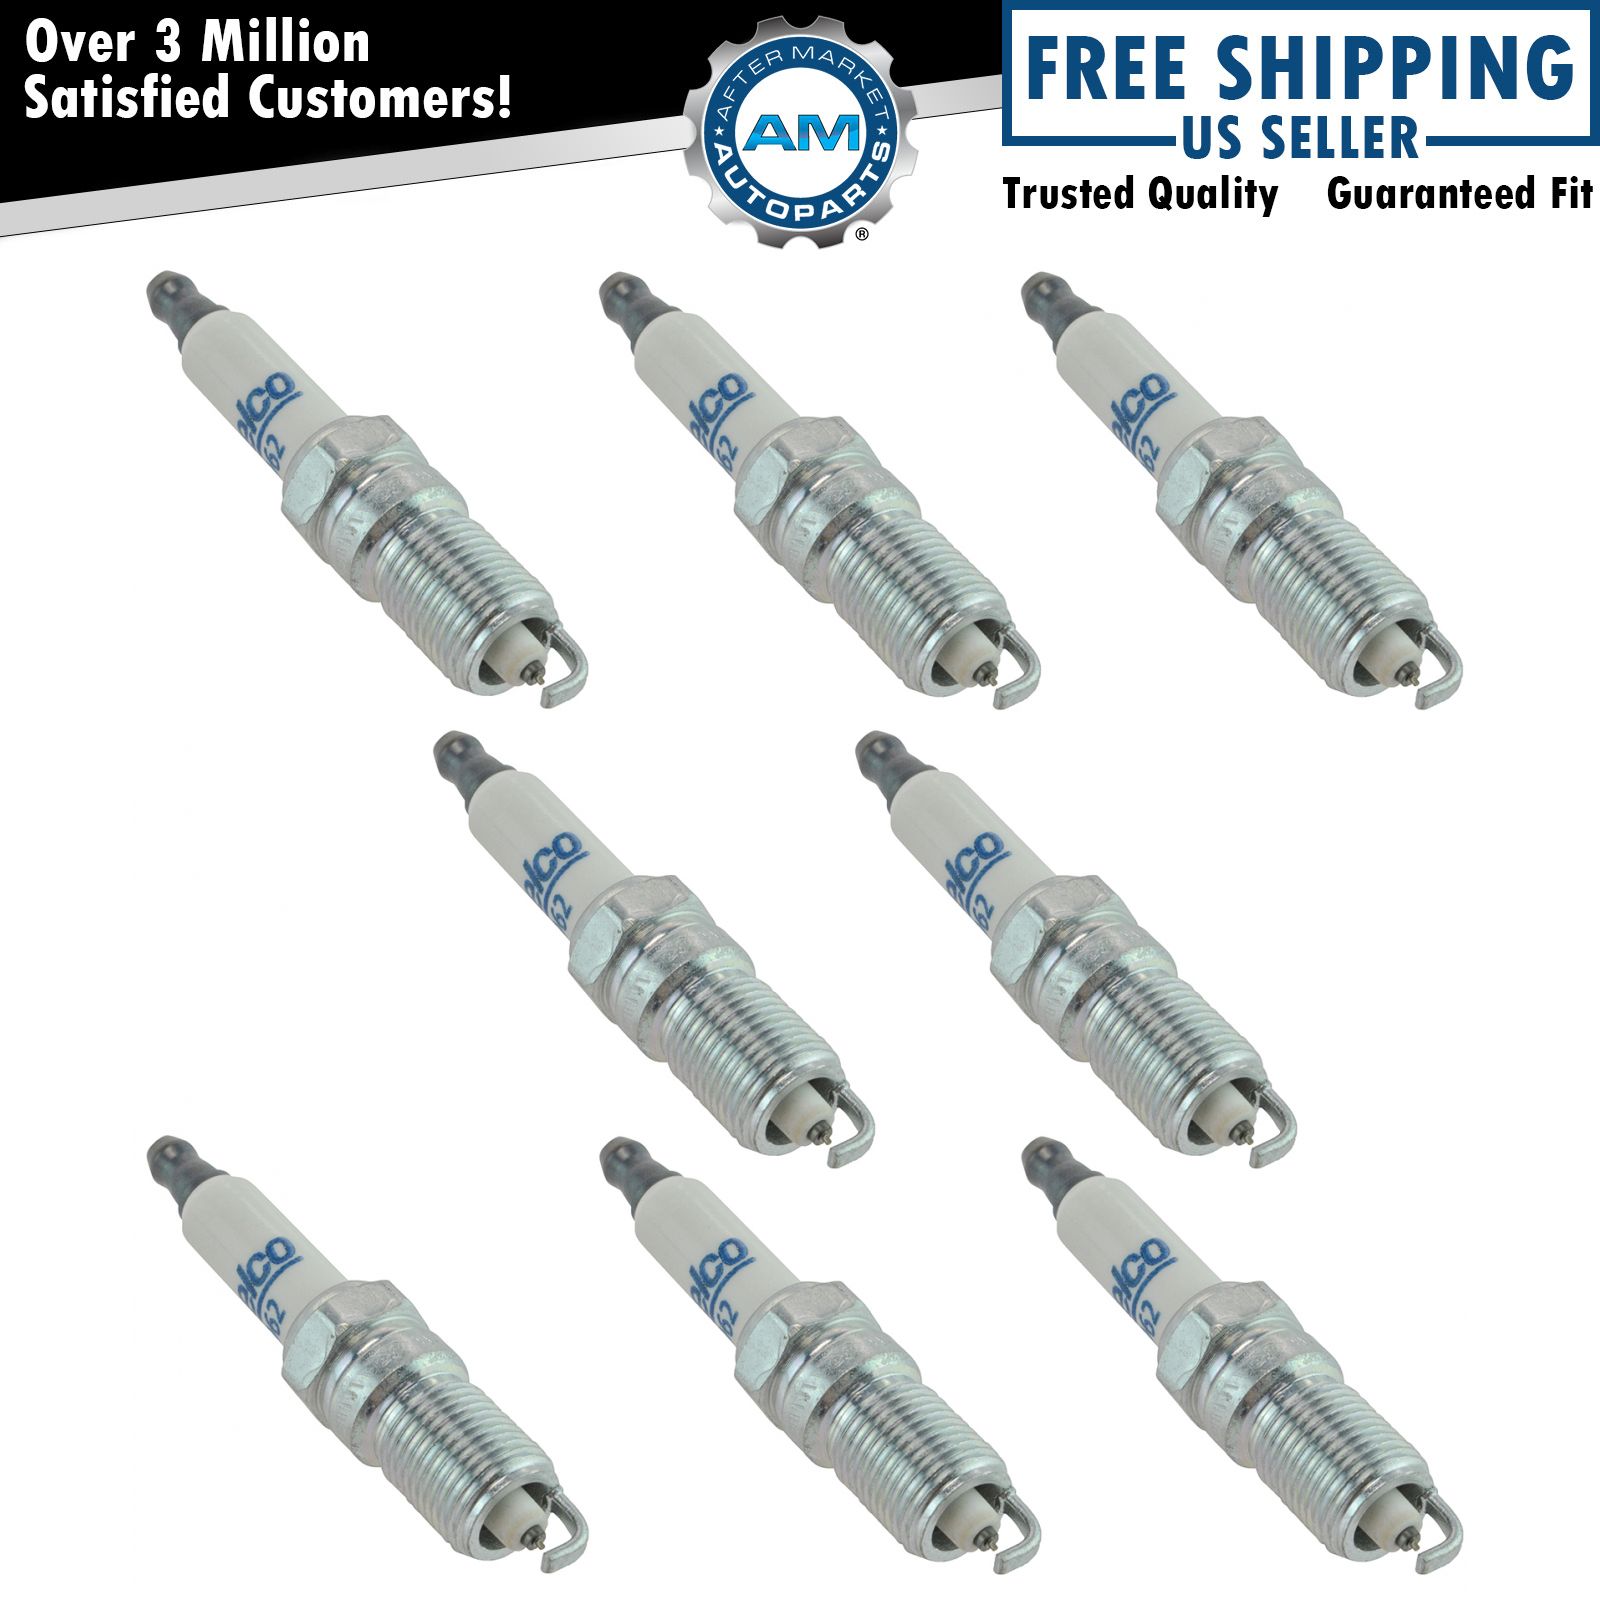 AC Delco 41-962 Platinum Ignition Spark Plug Set of 8 for Chevy GMC Buick New